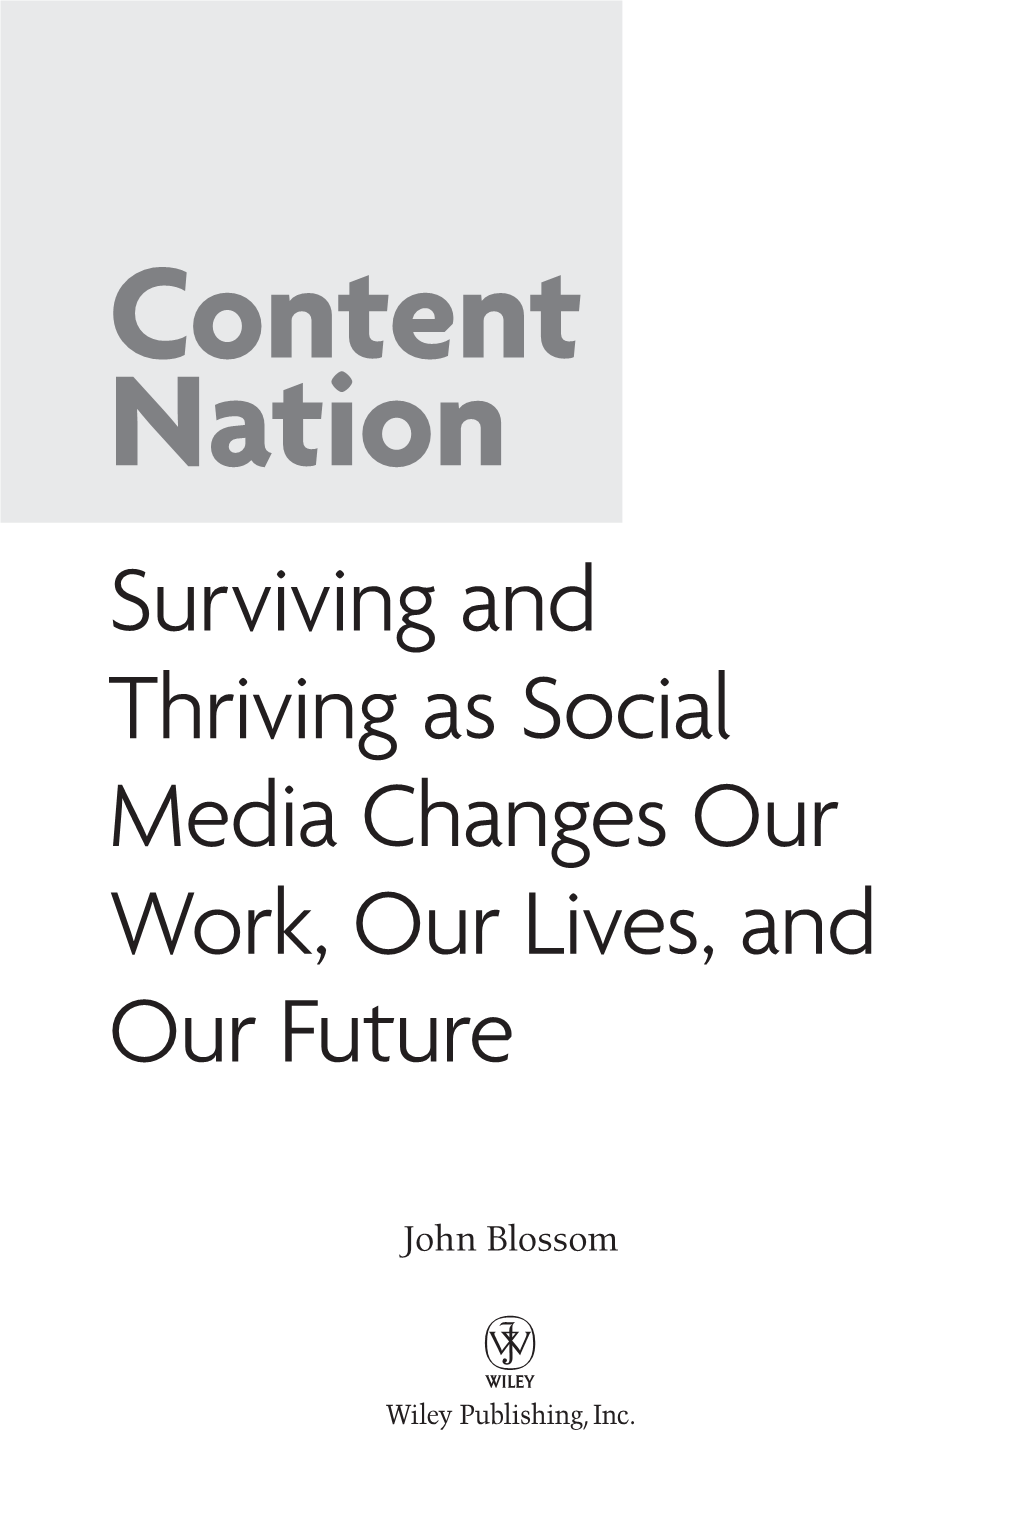 Content Nation Surviving and Thriving As Social Media Changes Our Work, Our Lives, and Our Future